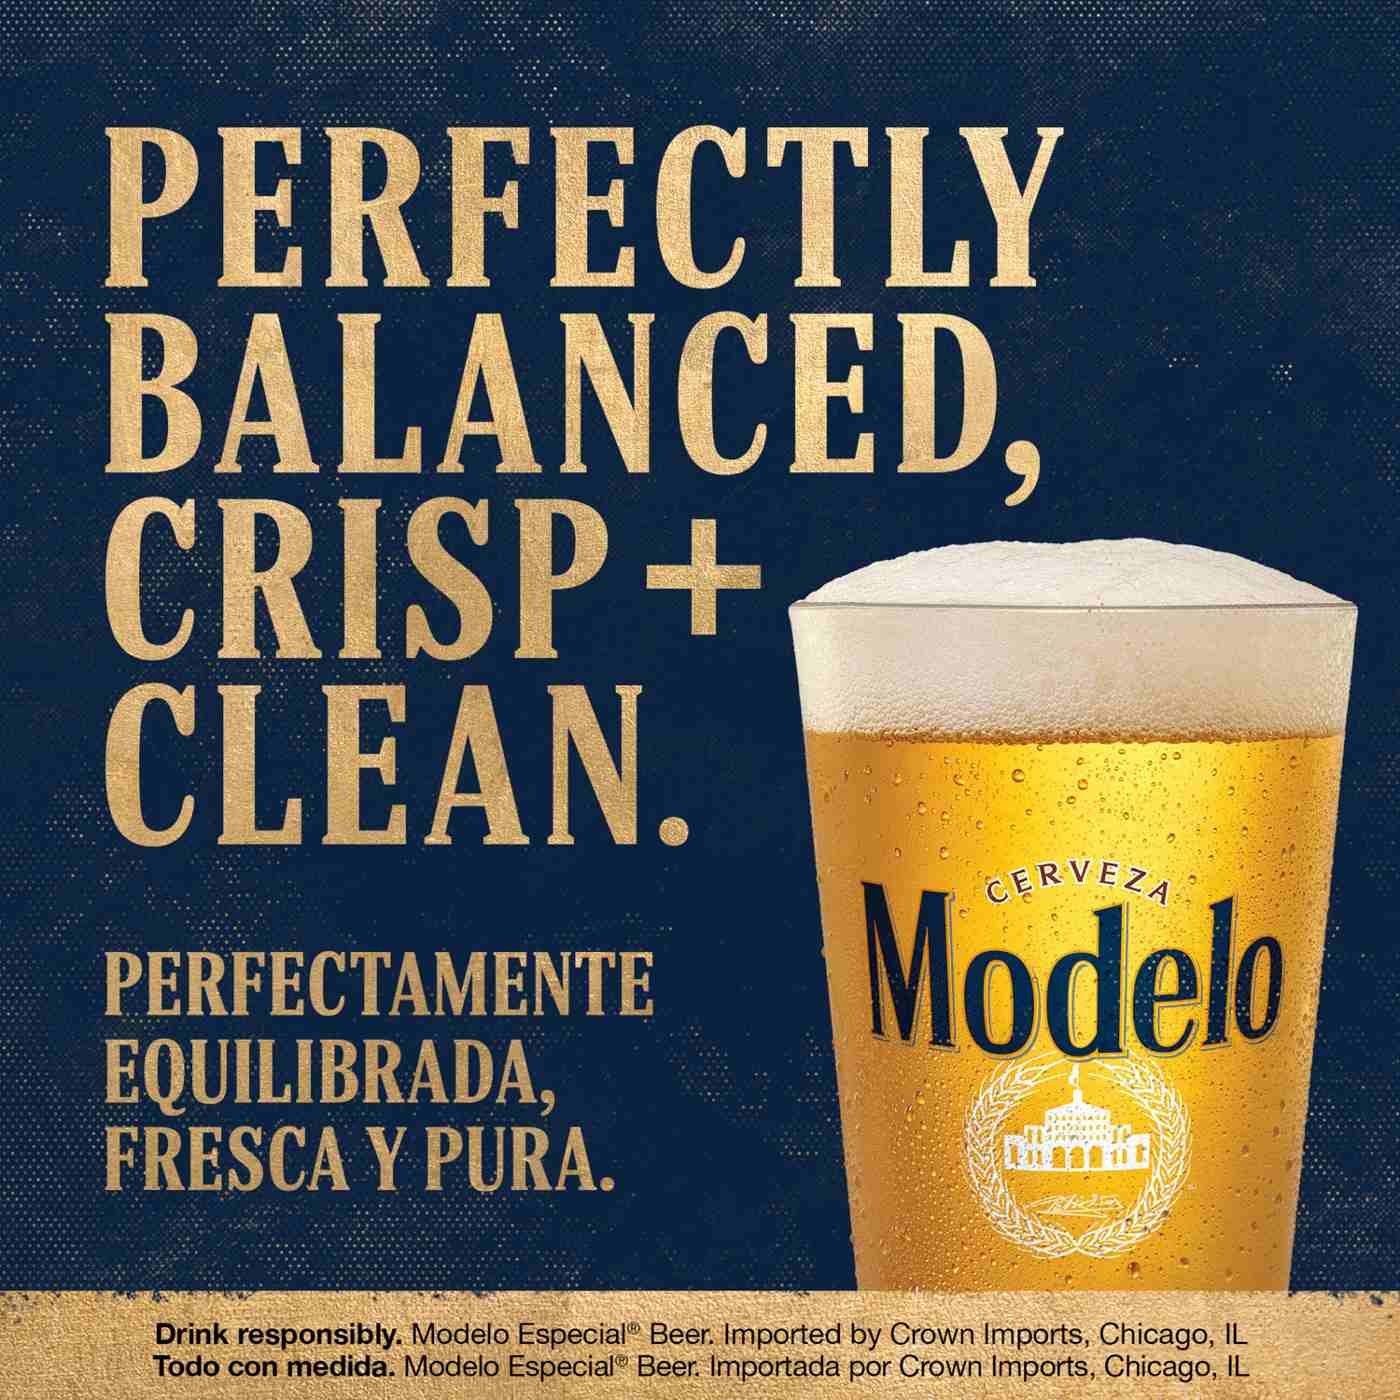 Modelo Especial Mexican Lager Import Beer 12 oz Cans, 18 pk; image 6 of 10